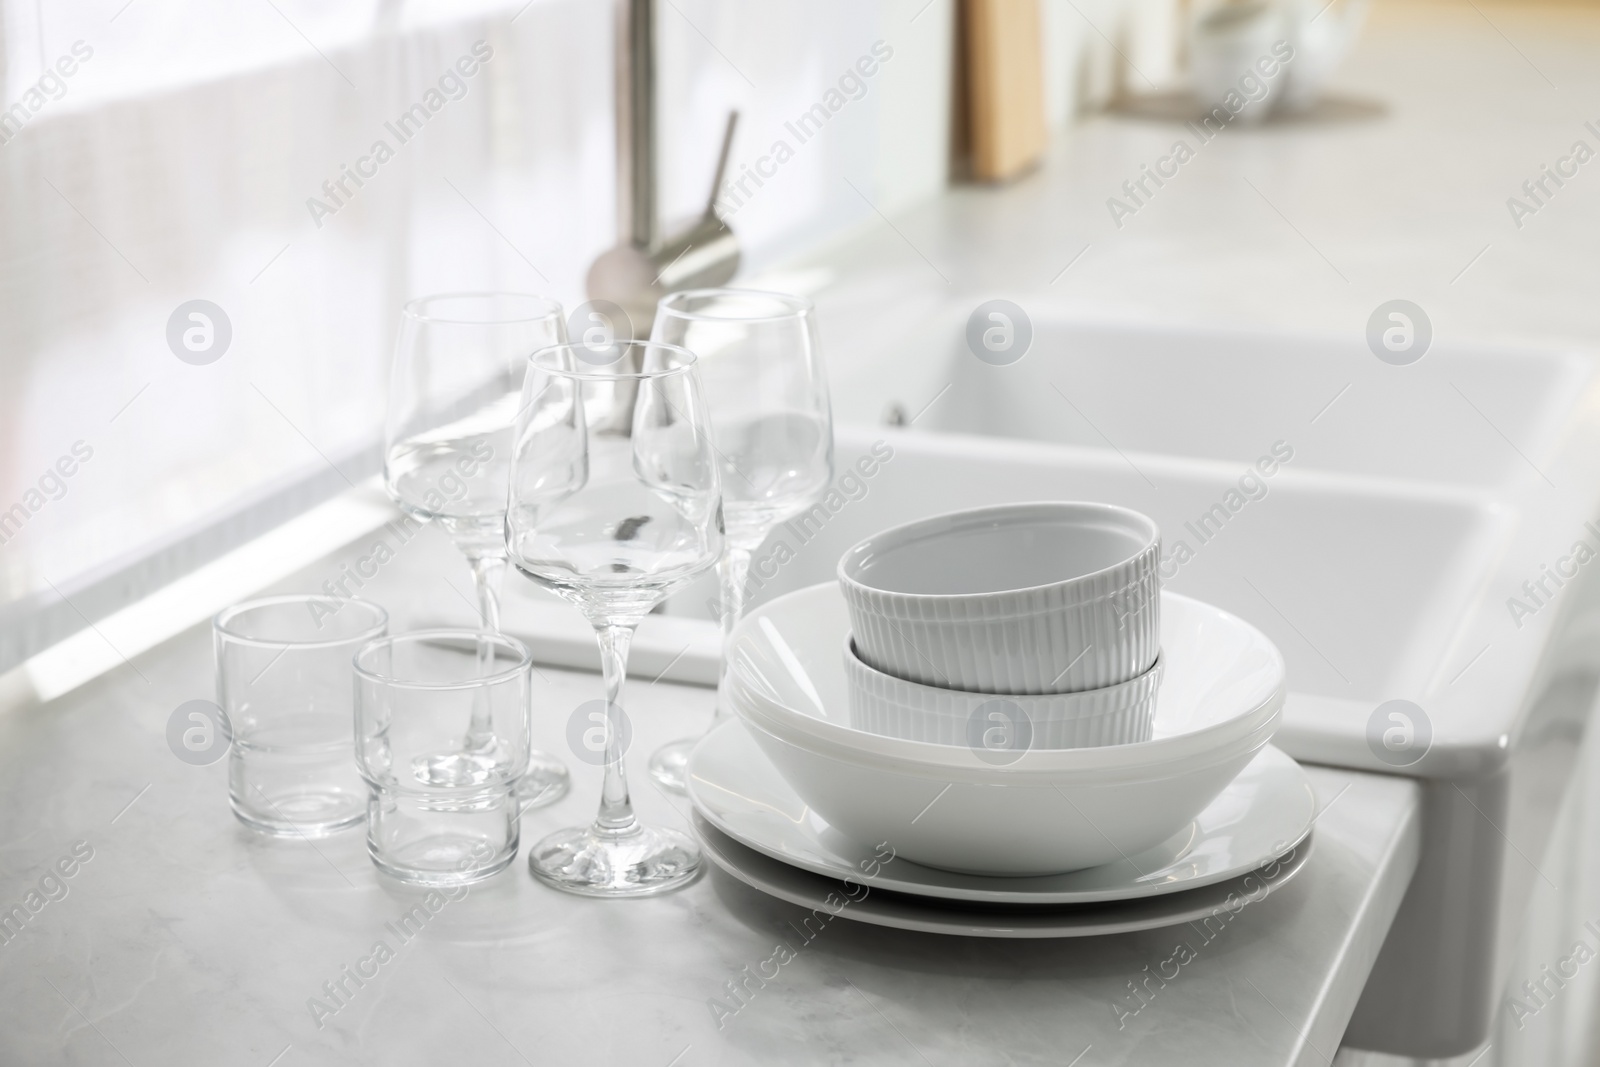 Photo of Different clean dishware and glasses on countertop near sink in kitchen